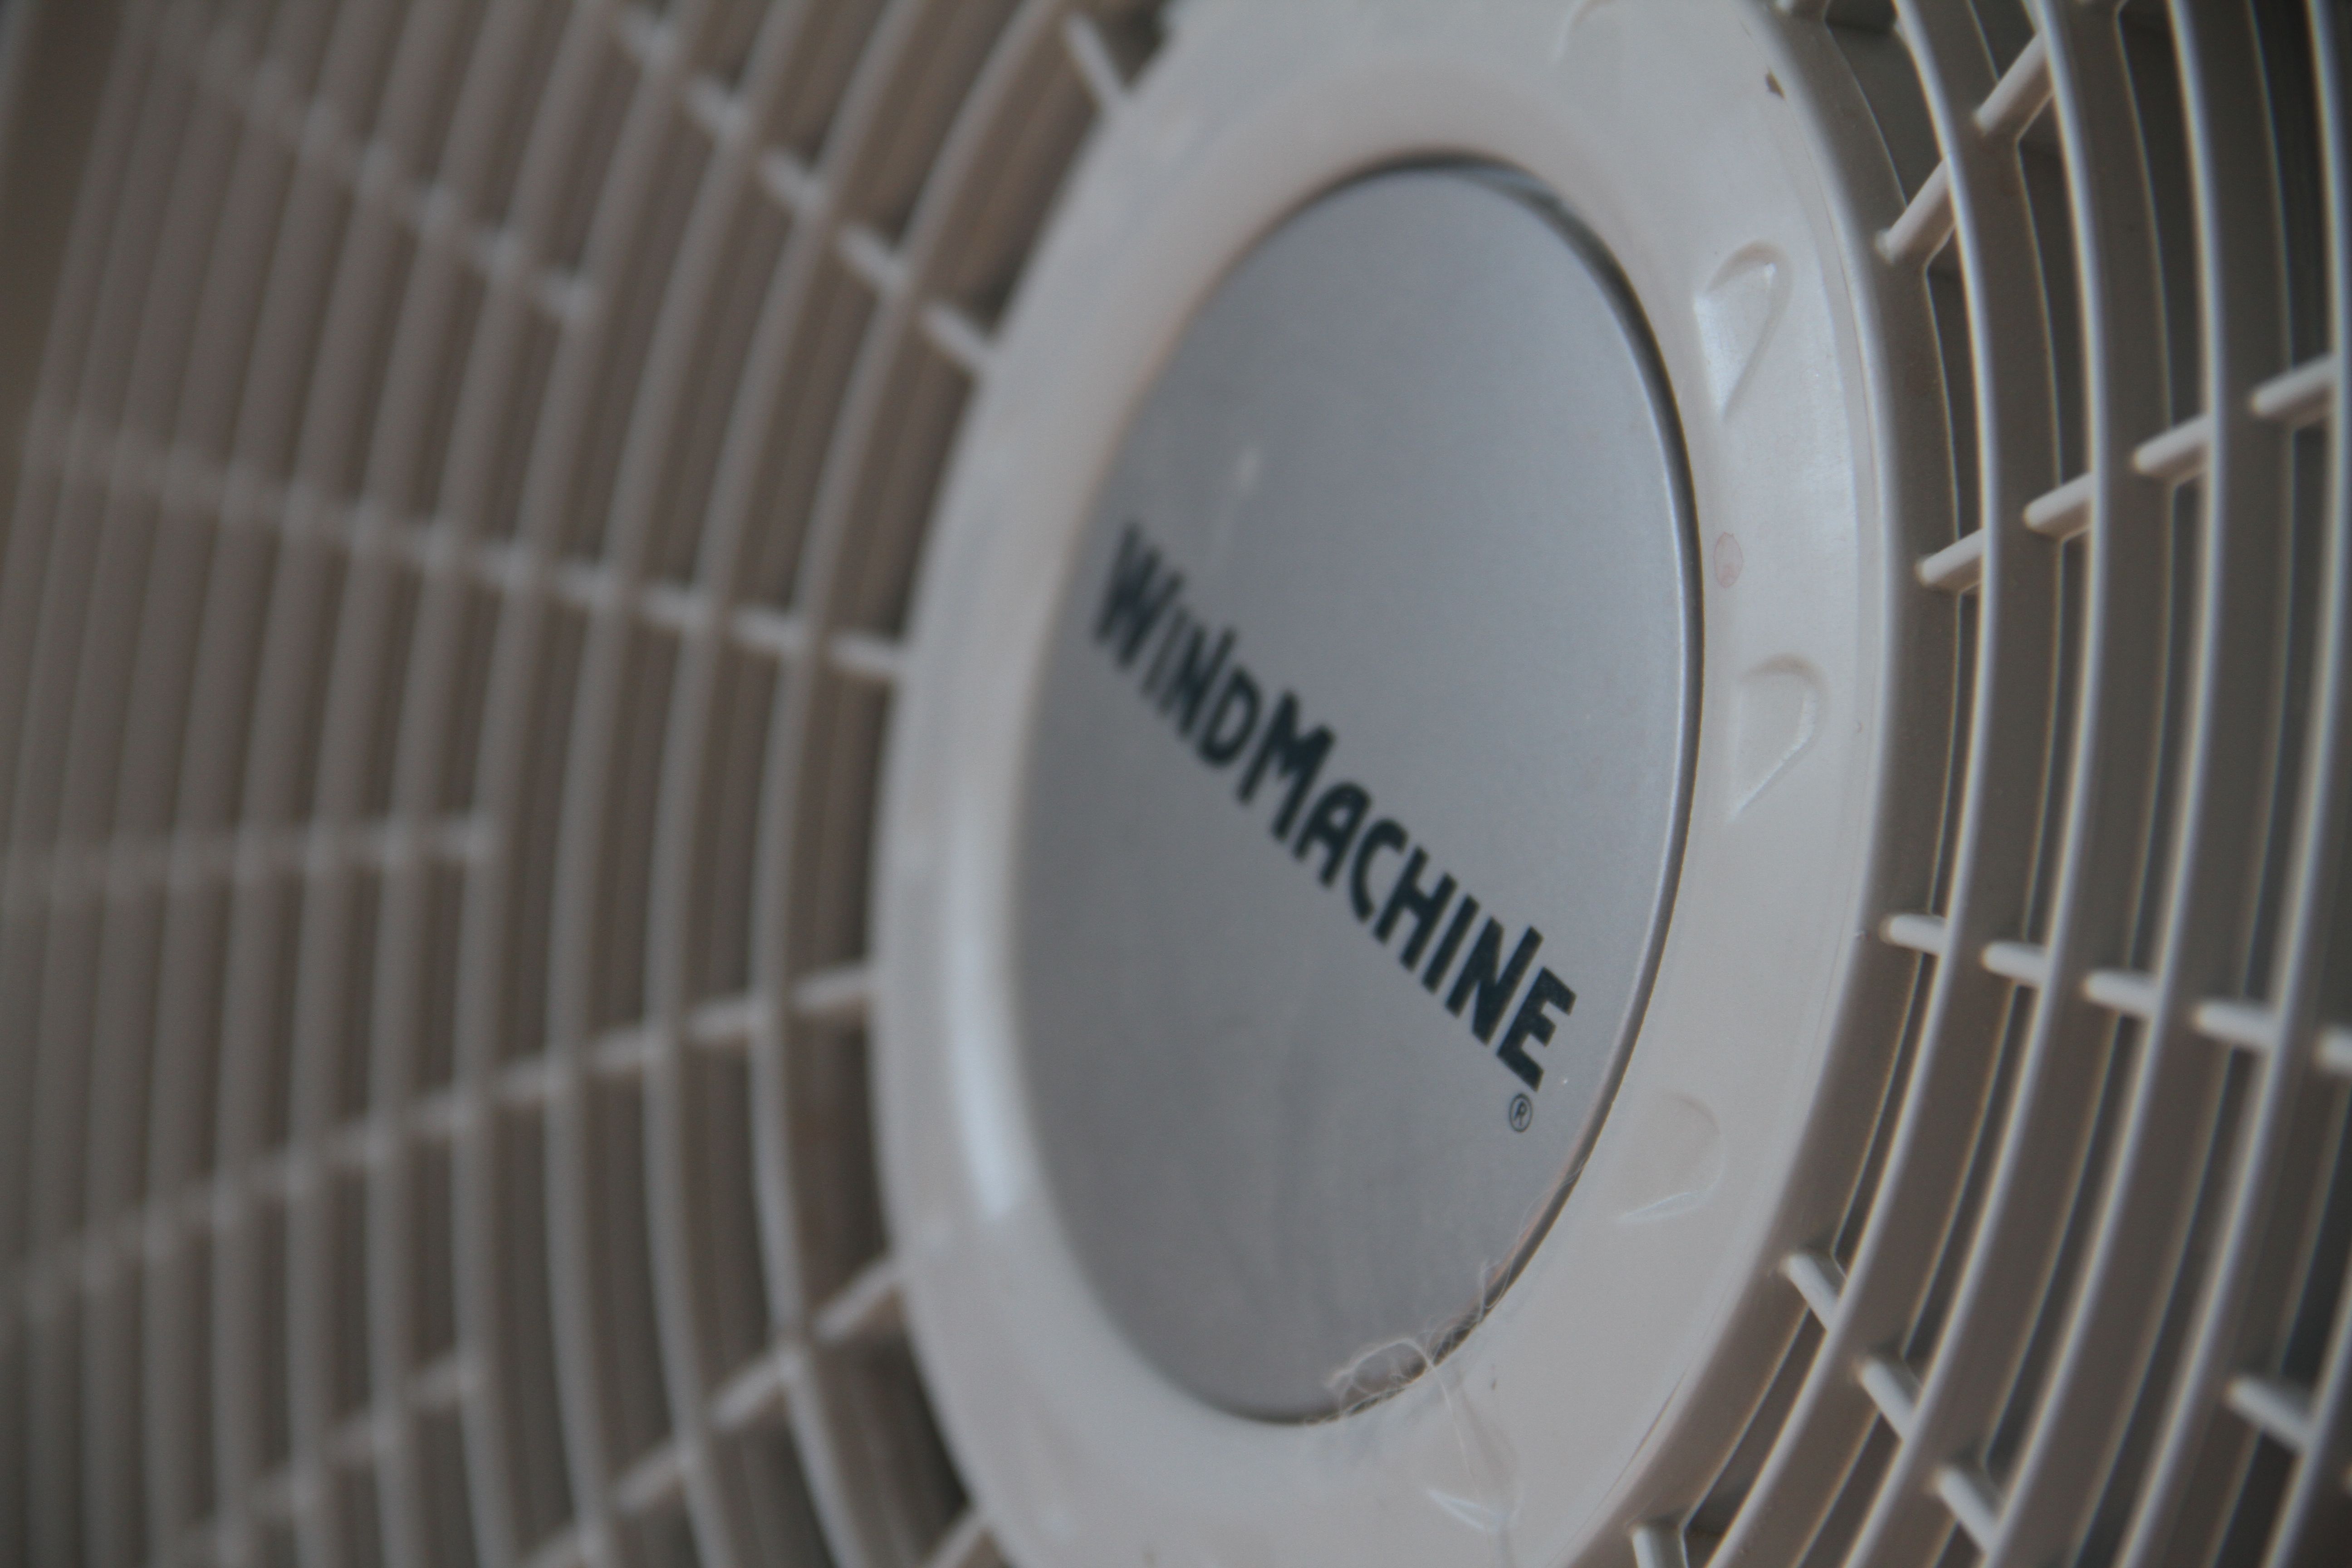 Fans, useful for speeding up off-gassing, and for keeping evenly heated air moving across the floors.